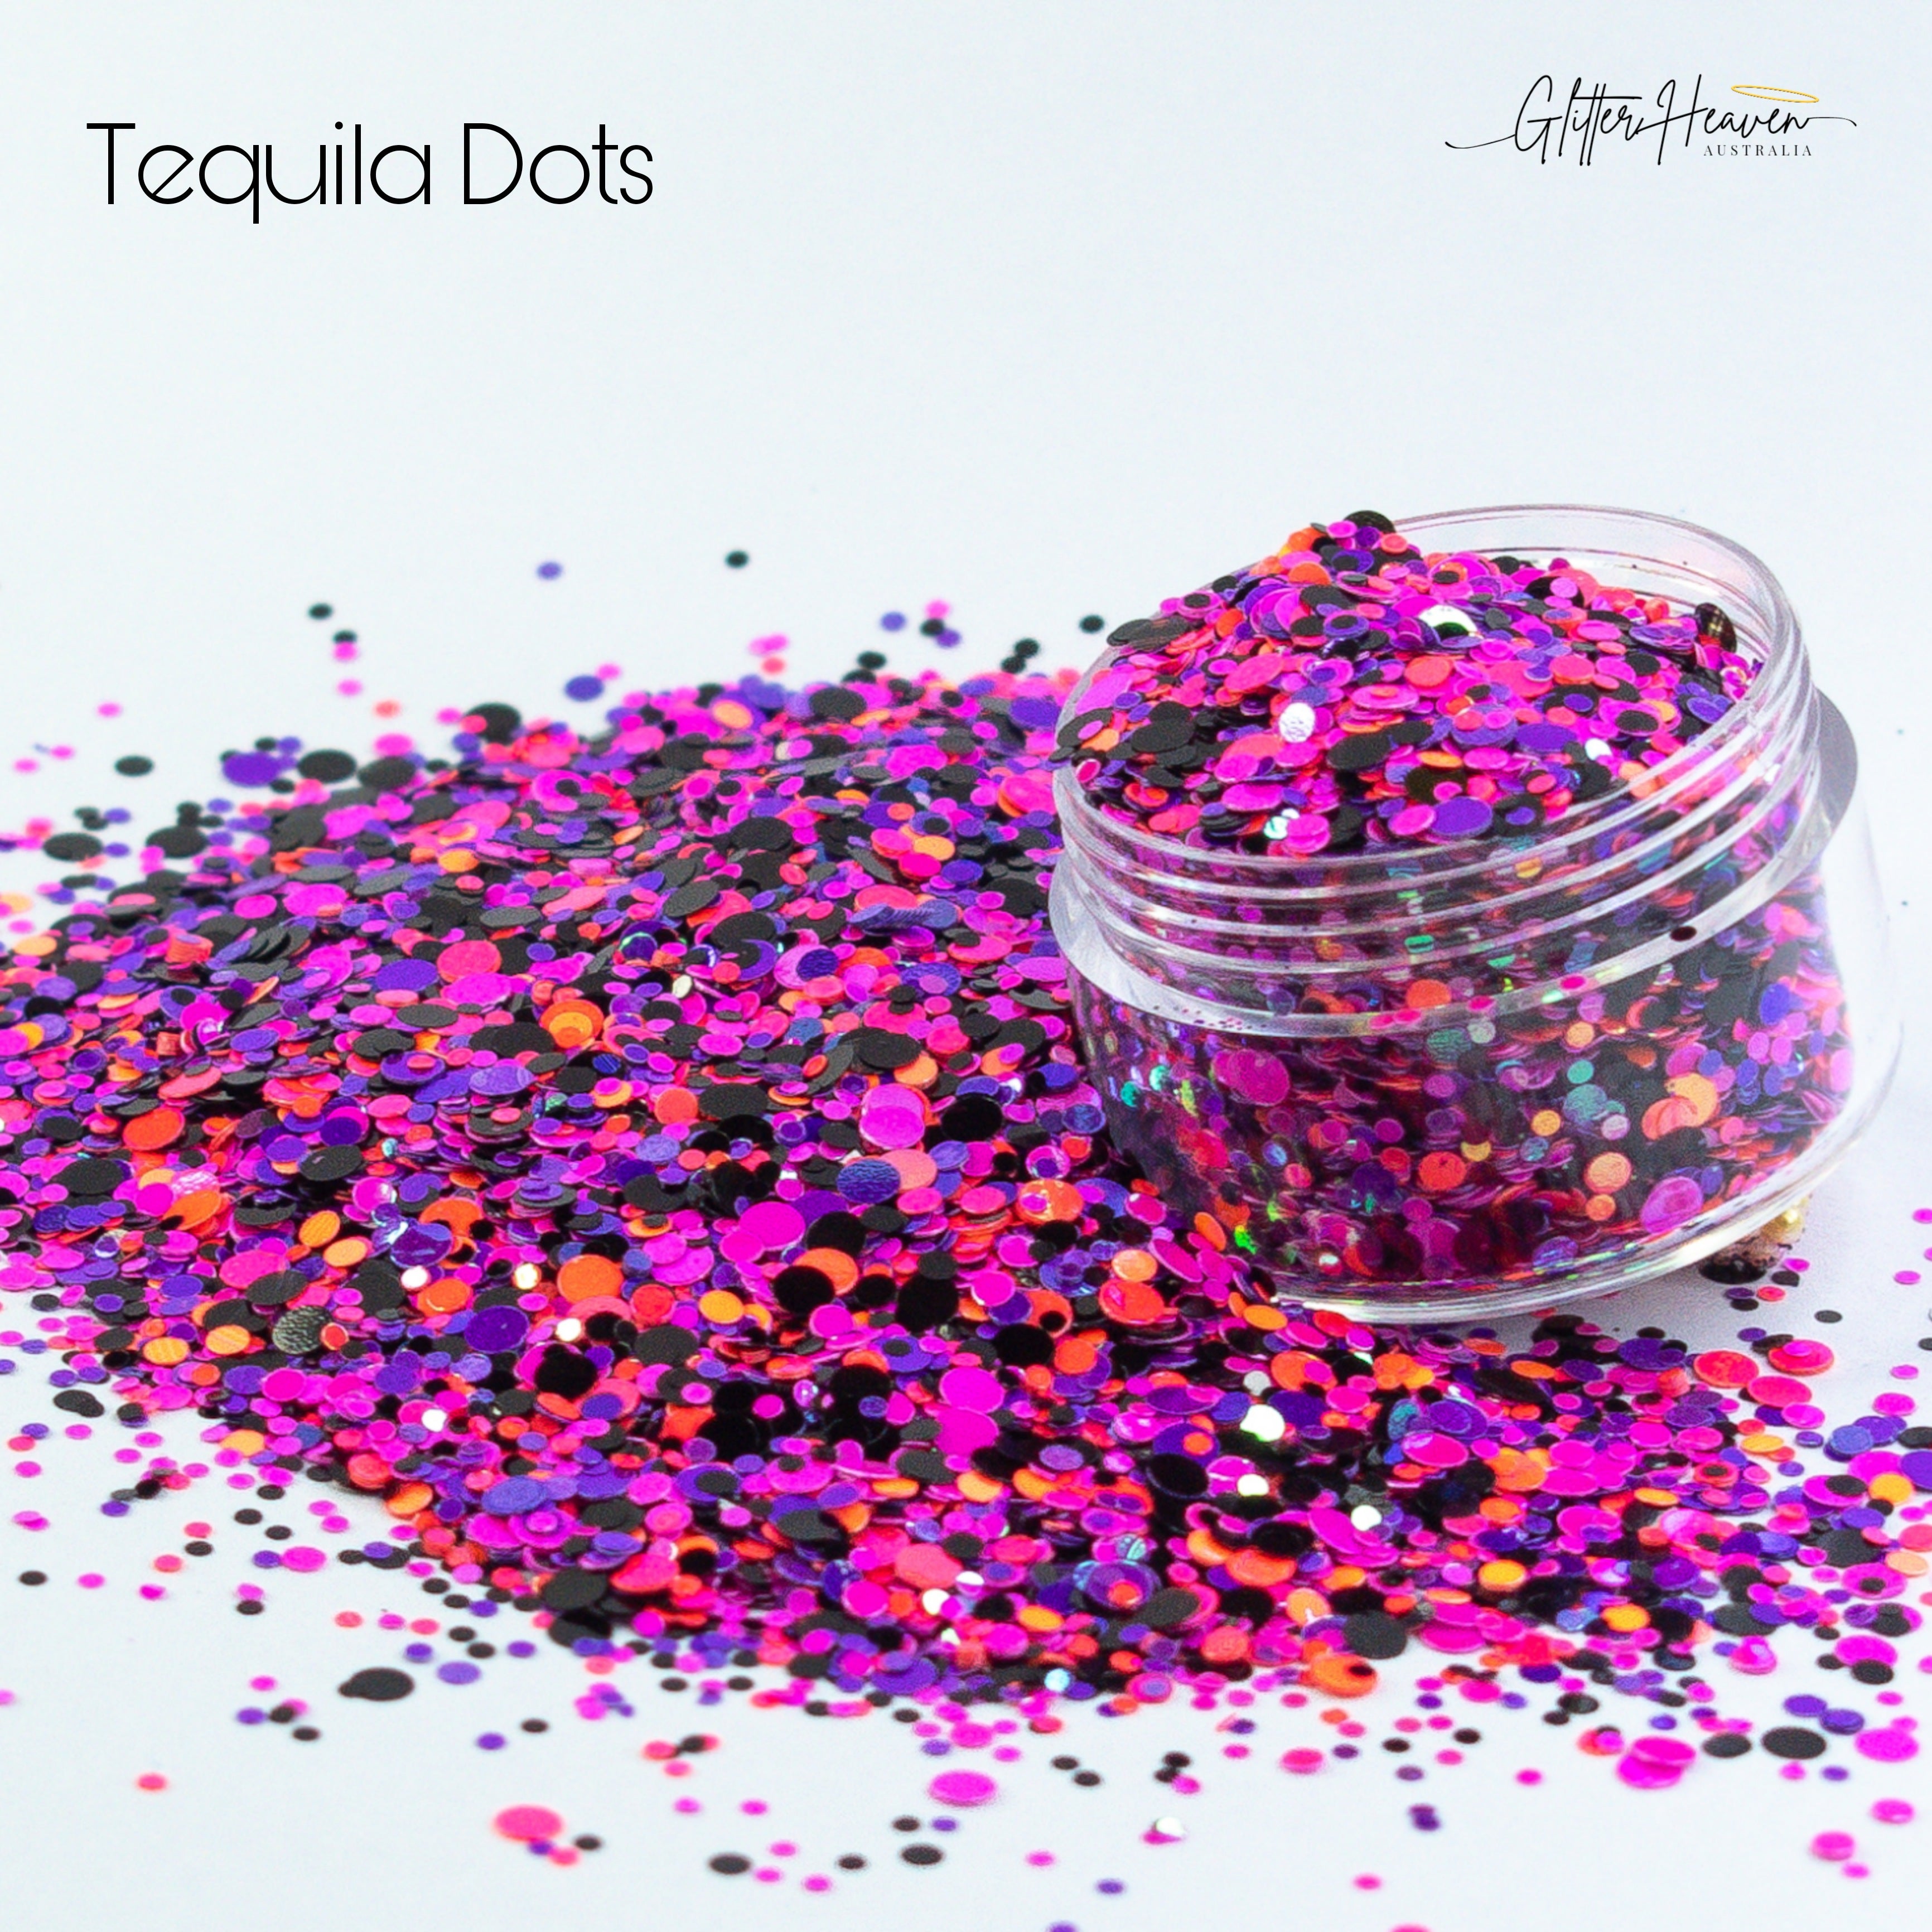 Tequila Dots